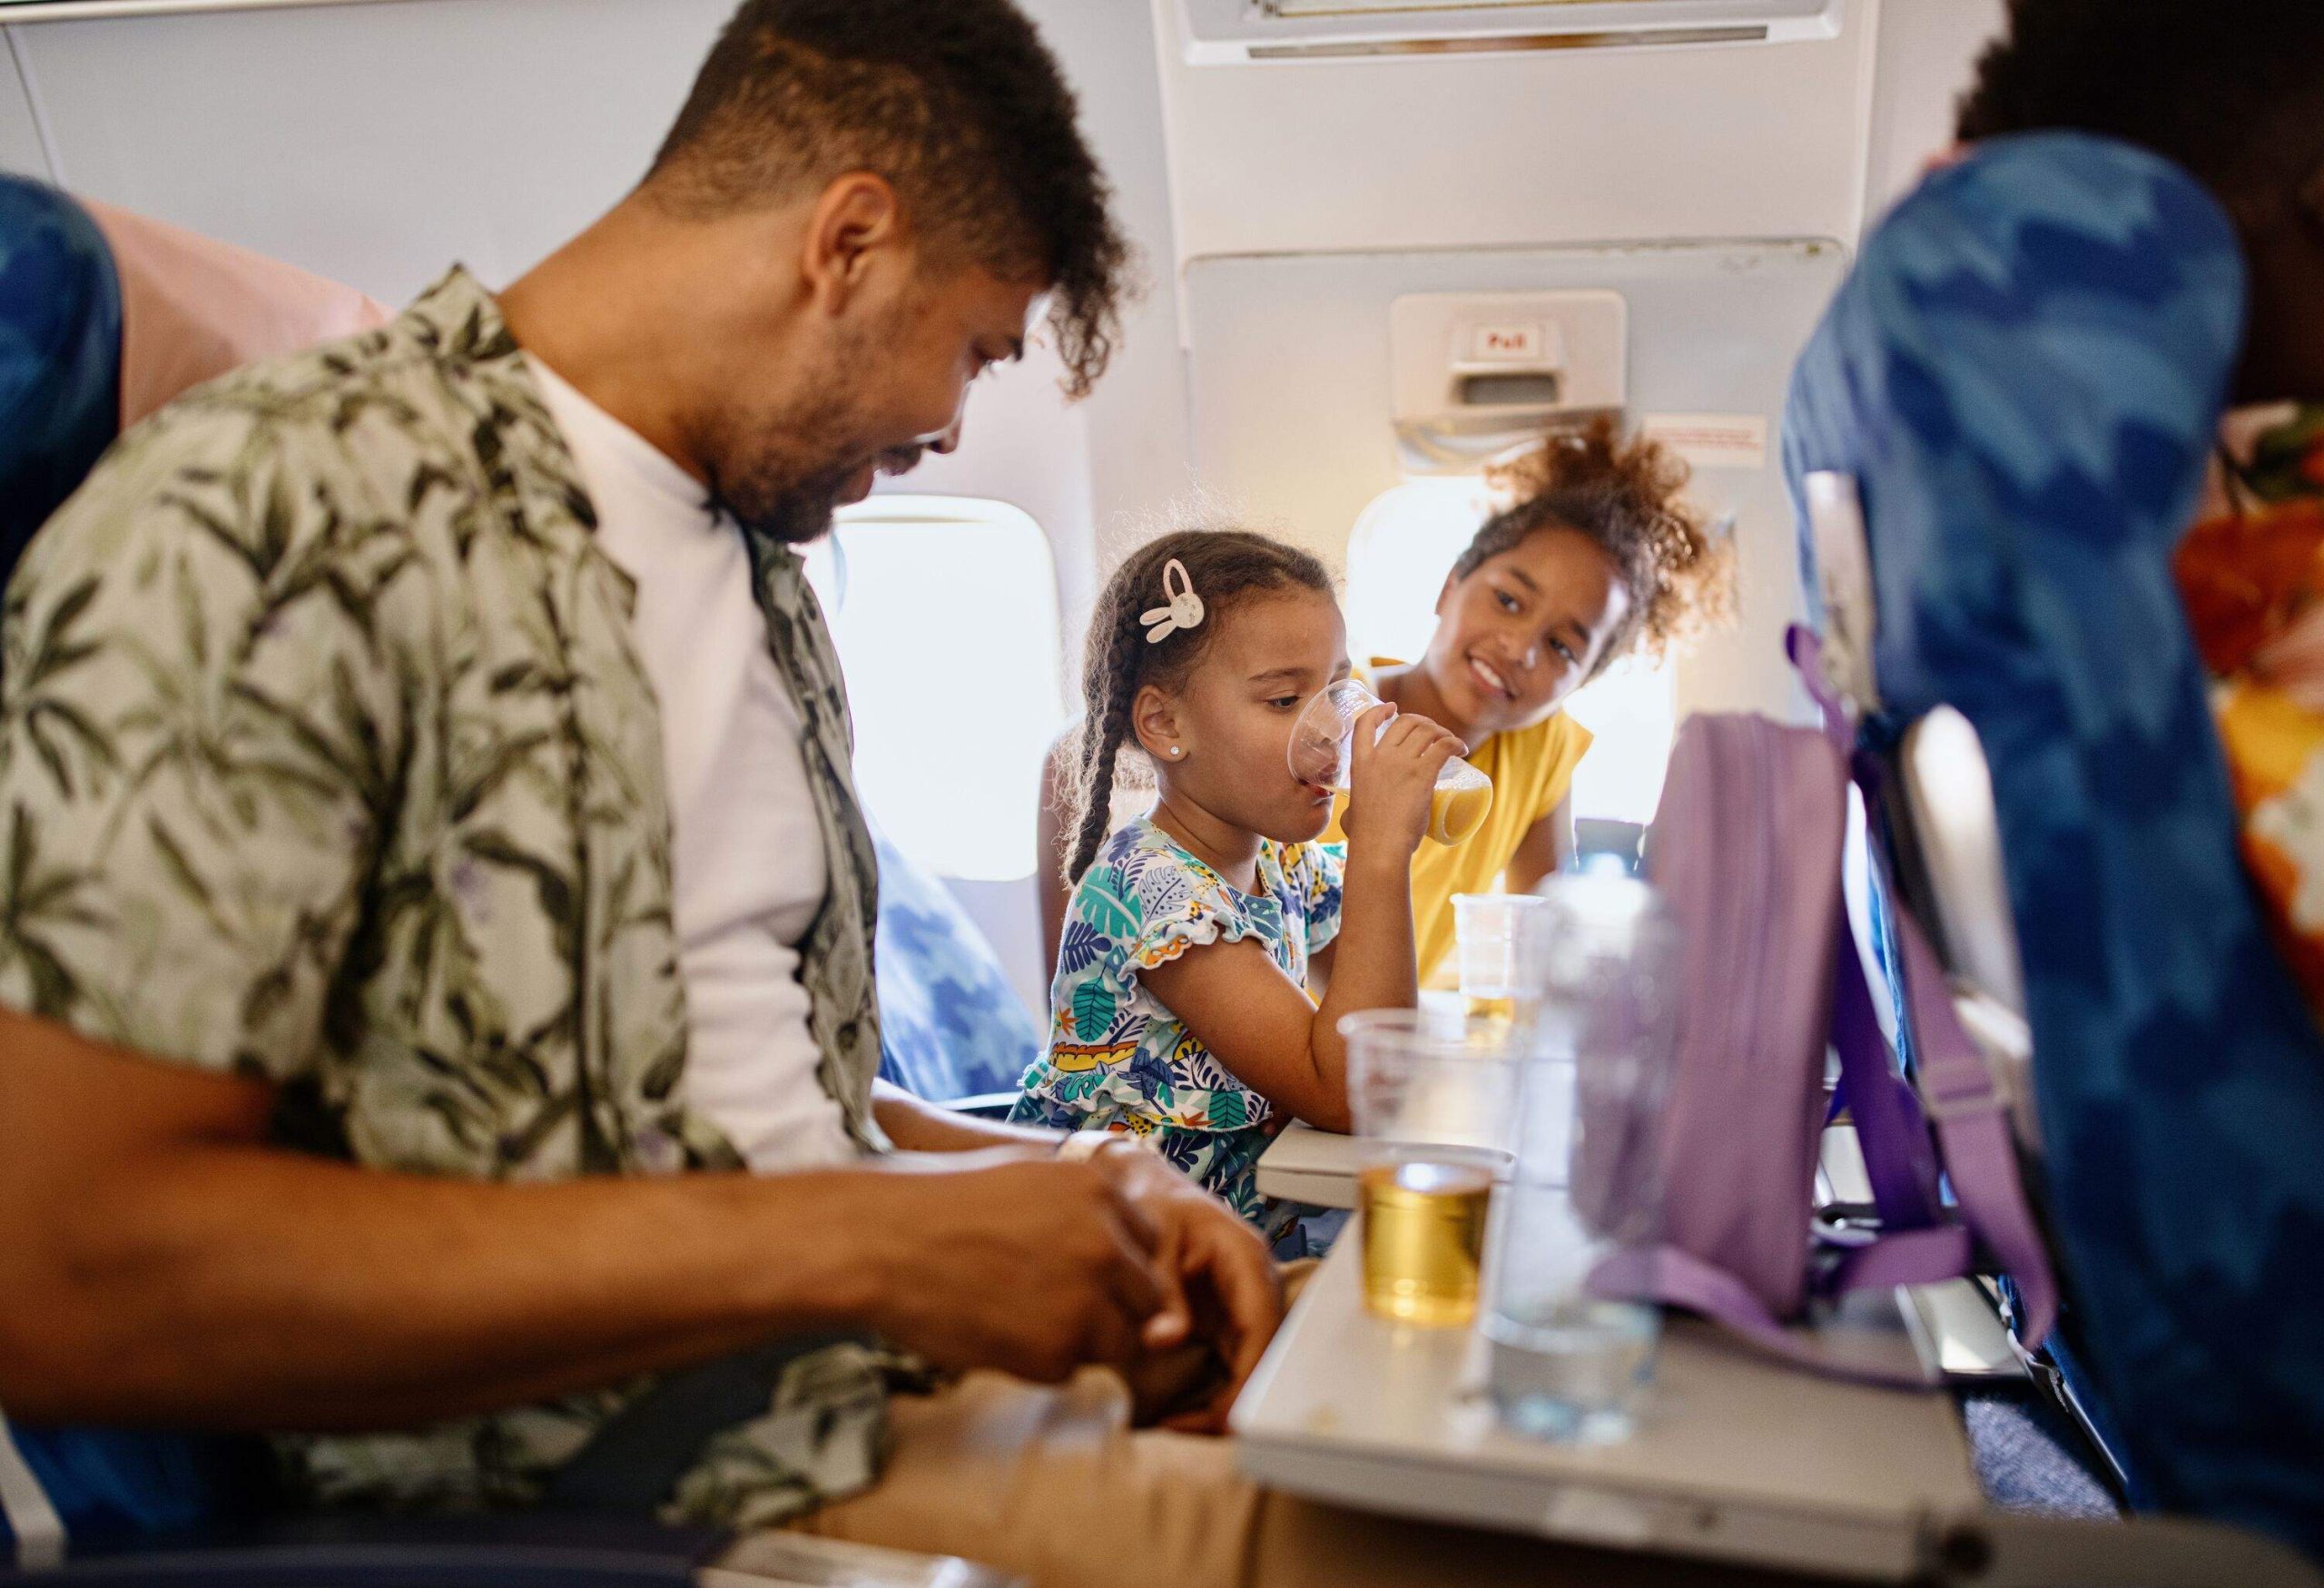 A man and two young girls having drinks on a plane.